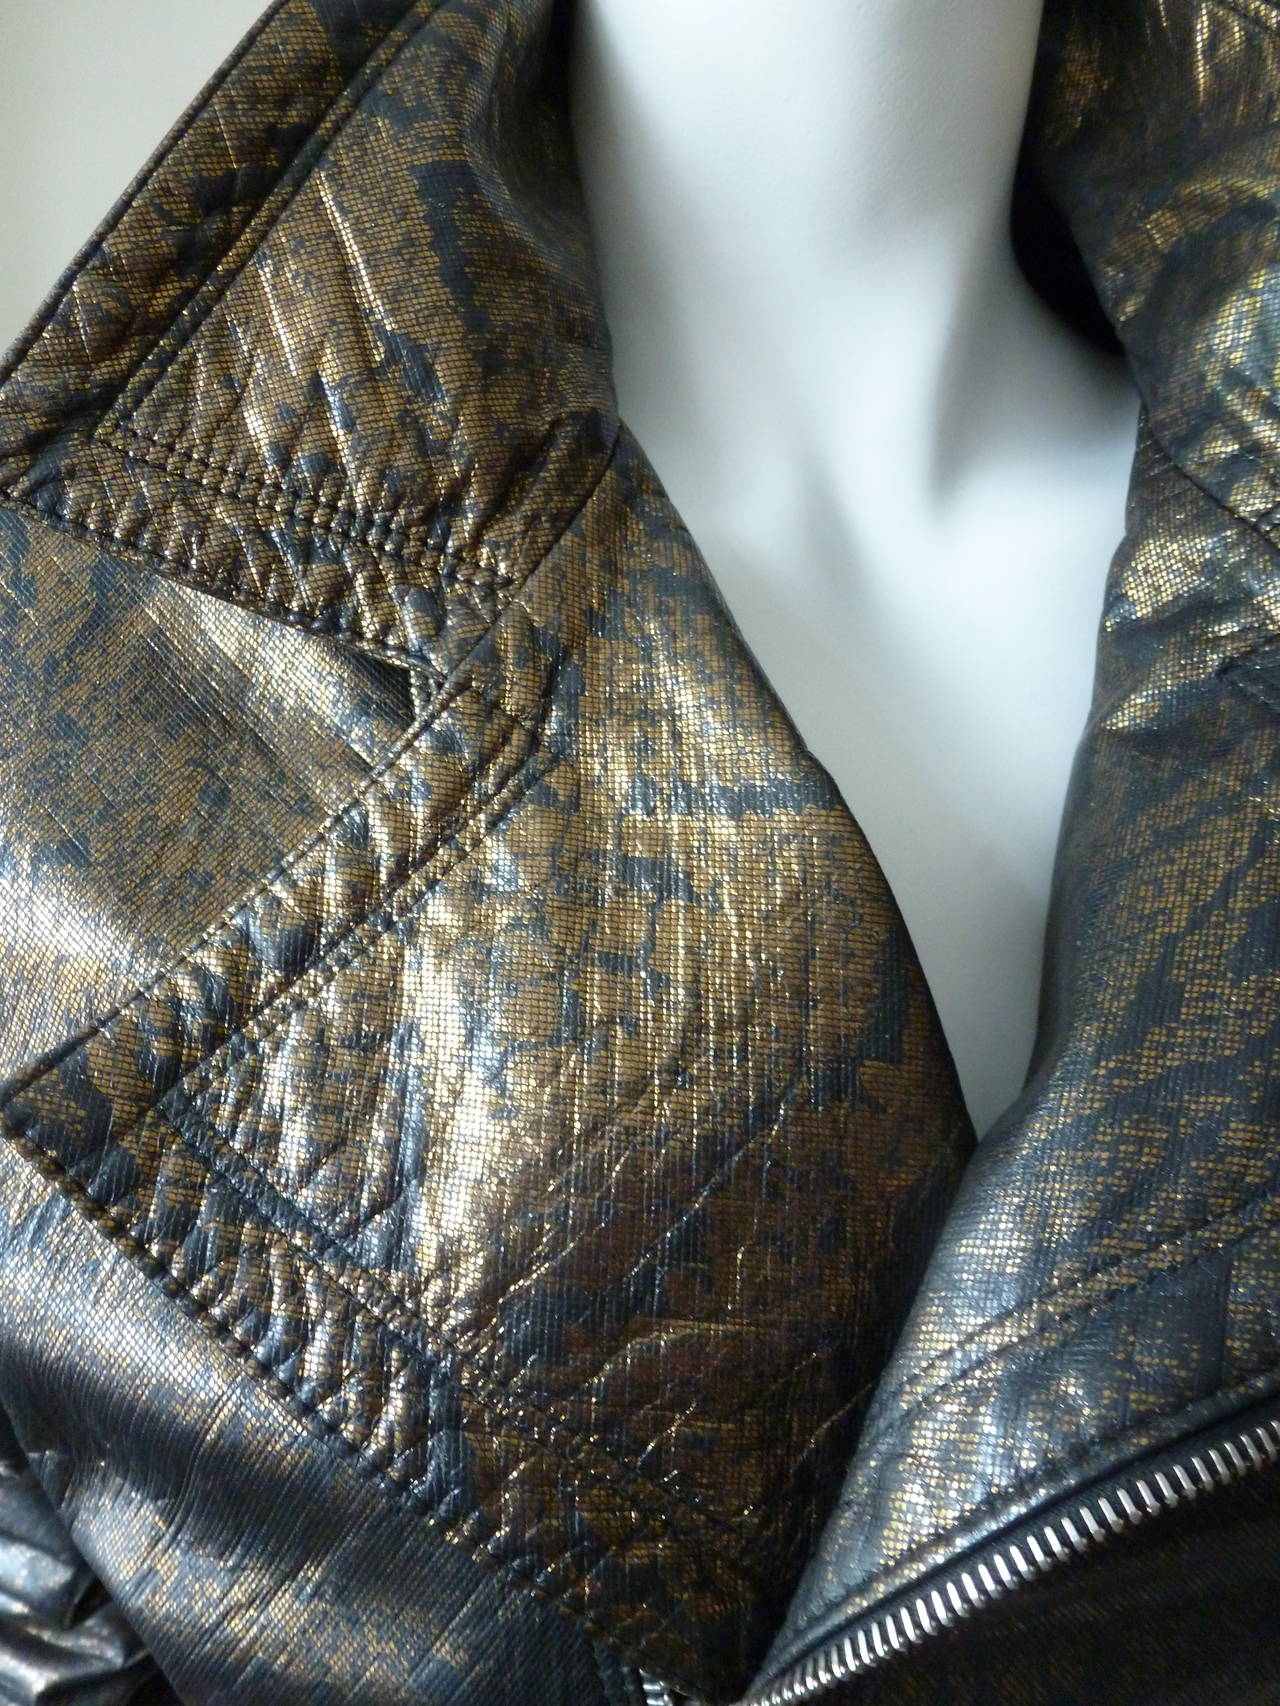 Rare Gianni Versace black and bronze metallic python skin effect cropped leather biker jacket from the Fall 1994 collection. The jacket features metal Medusa embossed hardware, together with Greca belt detailing. The jacket is fully